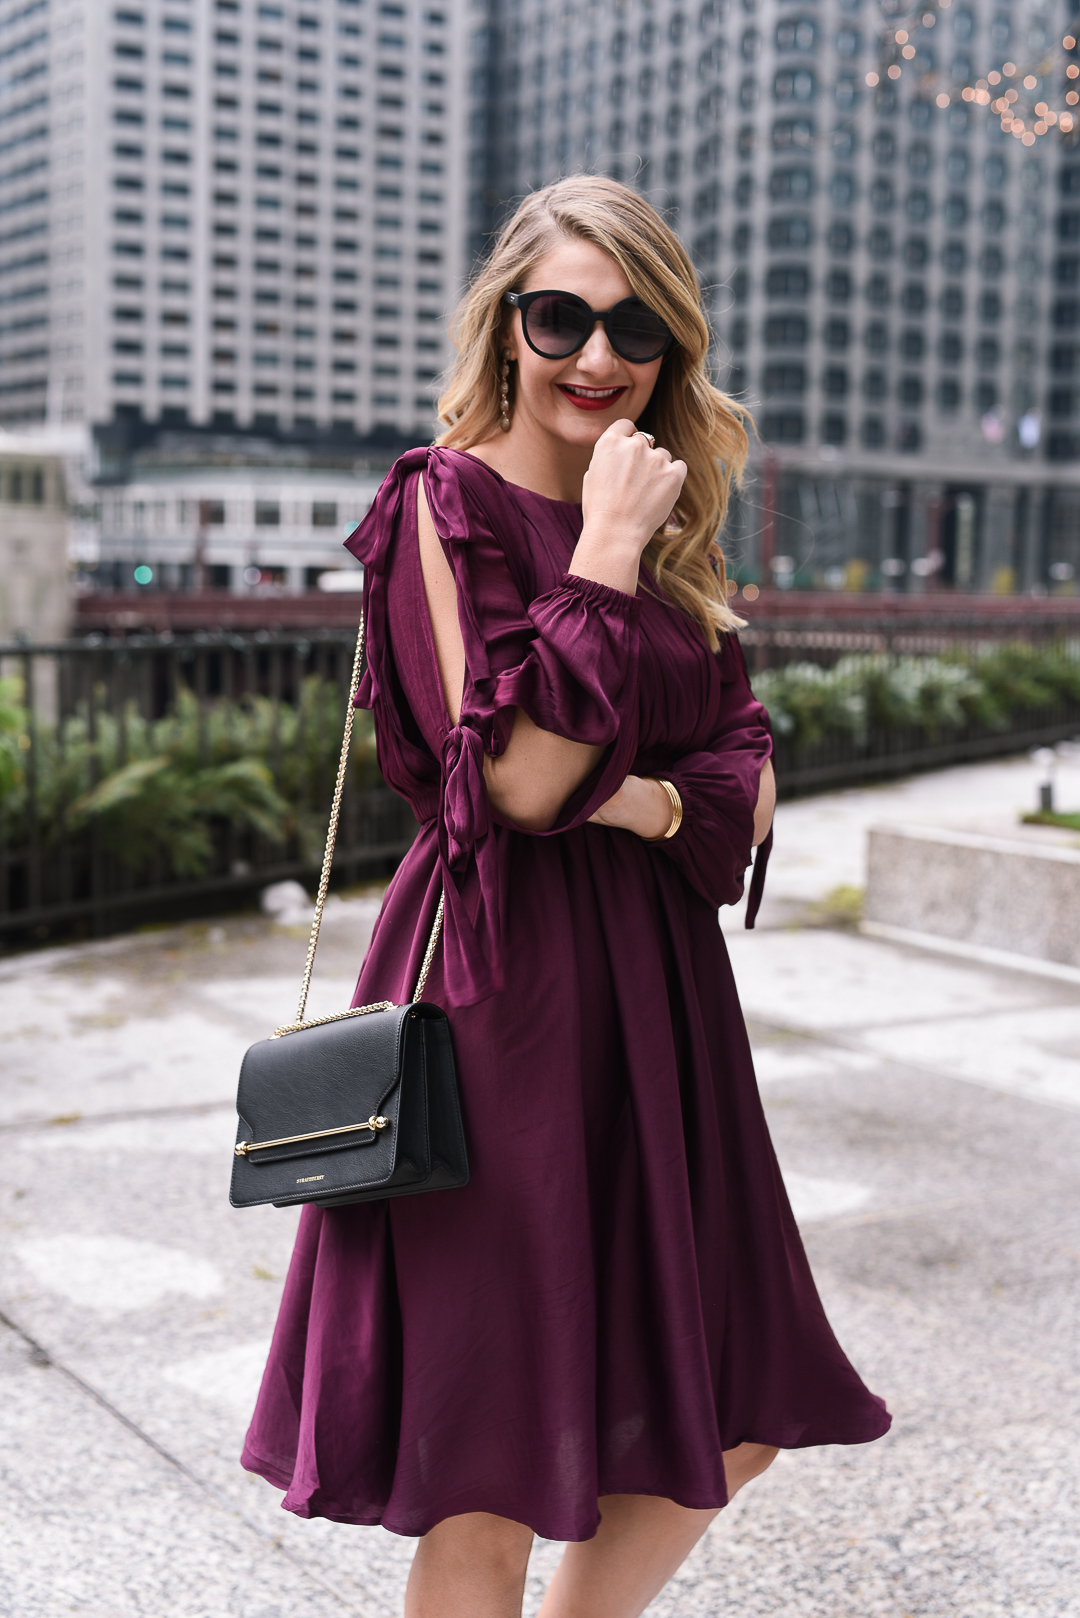 burgundy dress with bow tie sleeves in silk - Burgundy Holiday Dress by Chicago fashion blogger Visions of Vogue